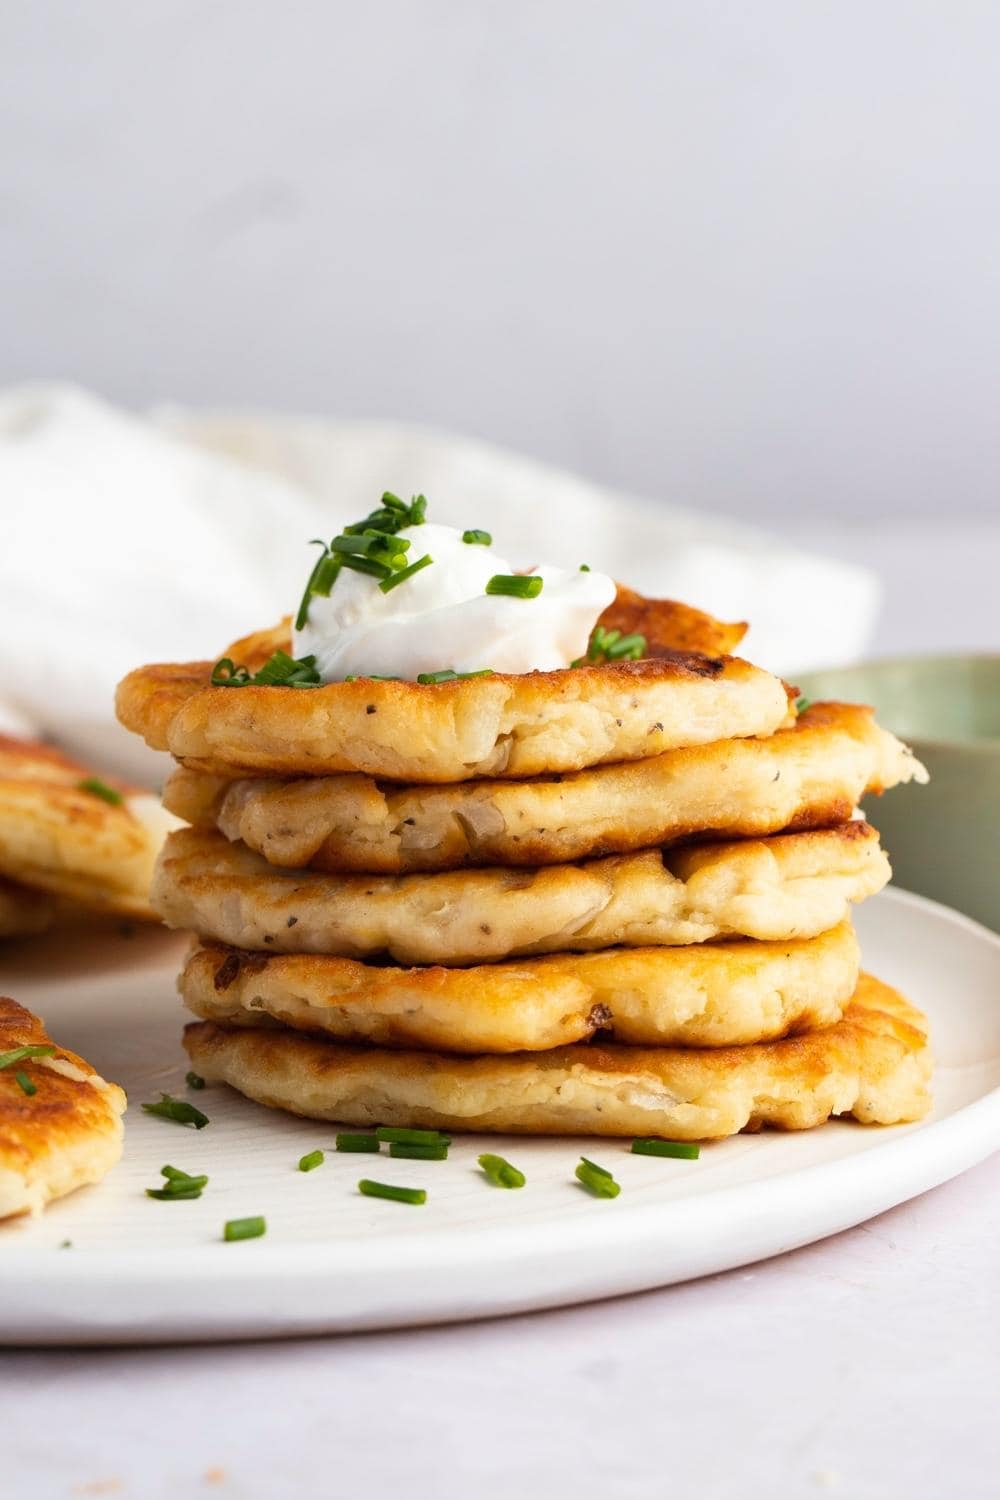 Pile of Potato Cakes Served on a White Plate With Sour Cream and Chives Garnish